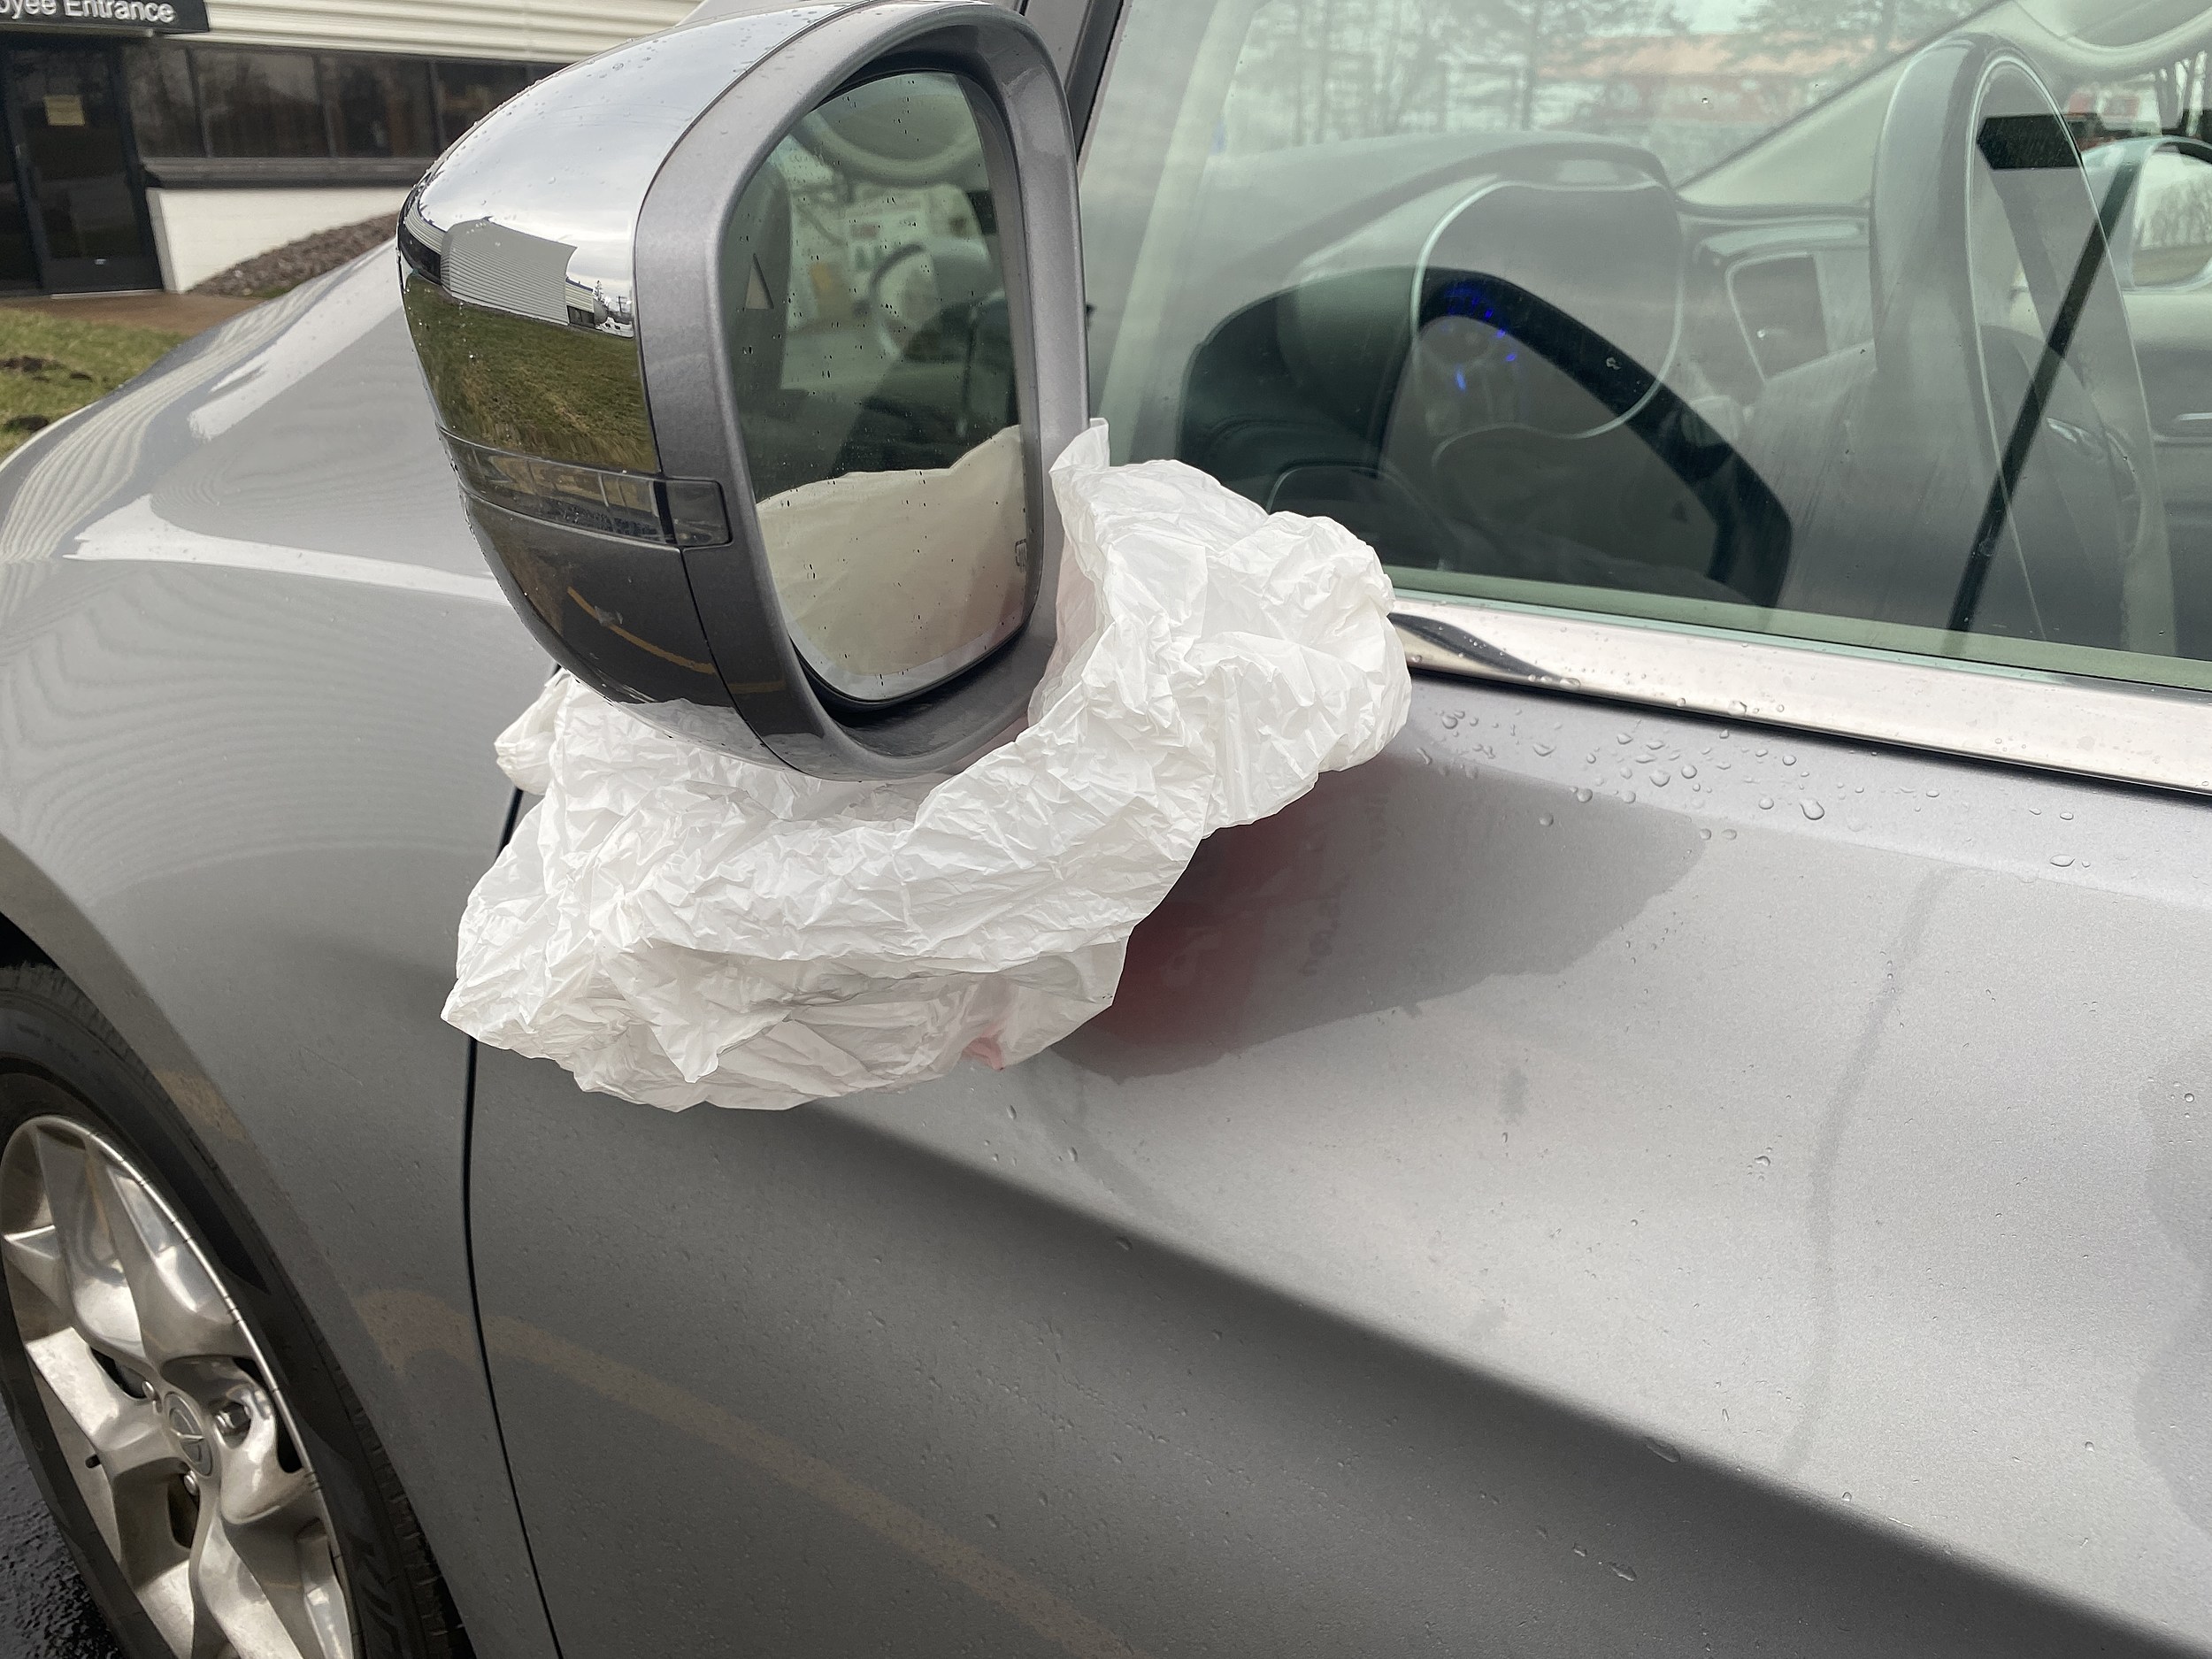 What It Means When Someone Ties A White Grocery Bag To Their Car